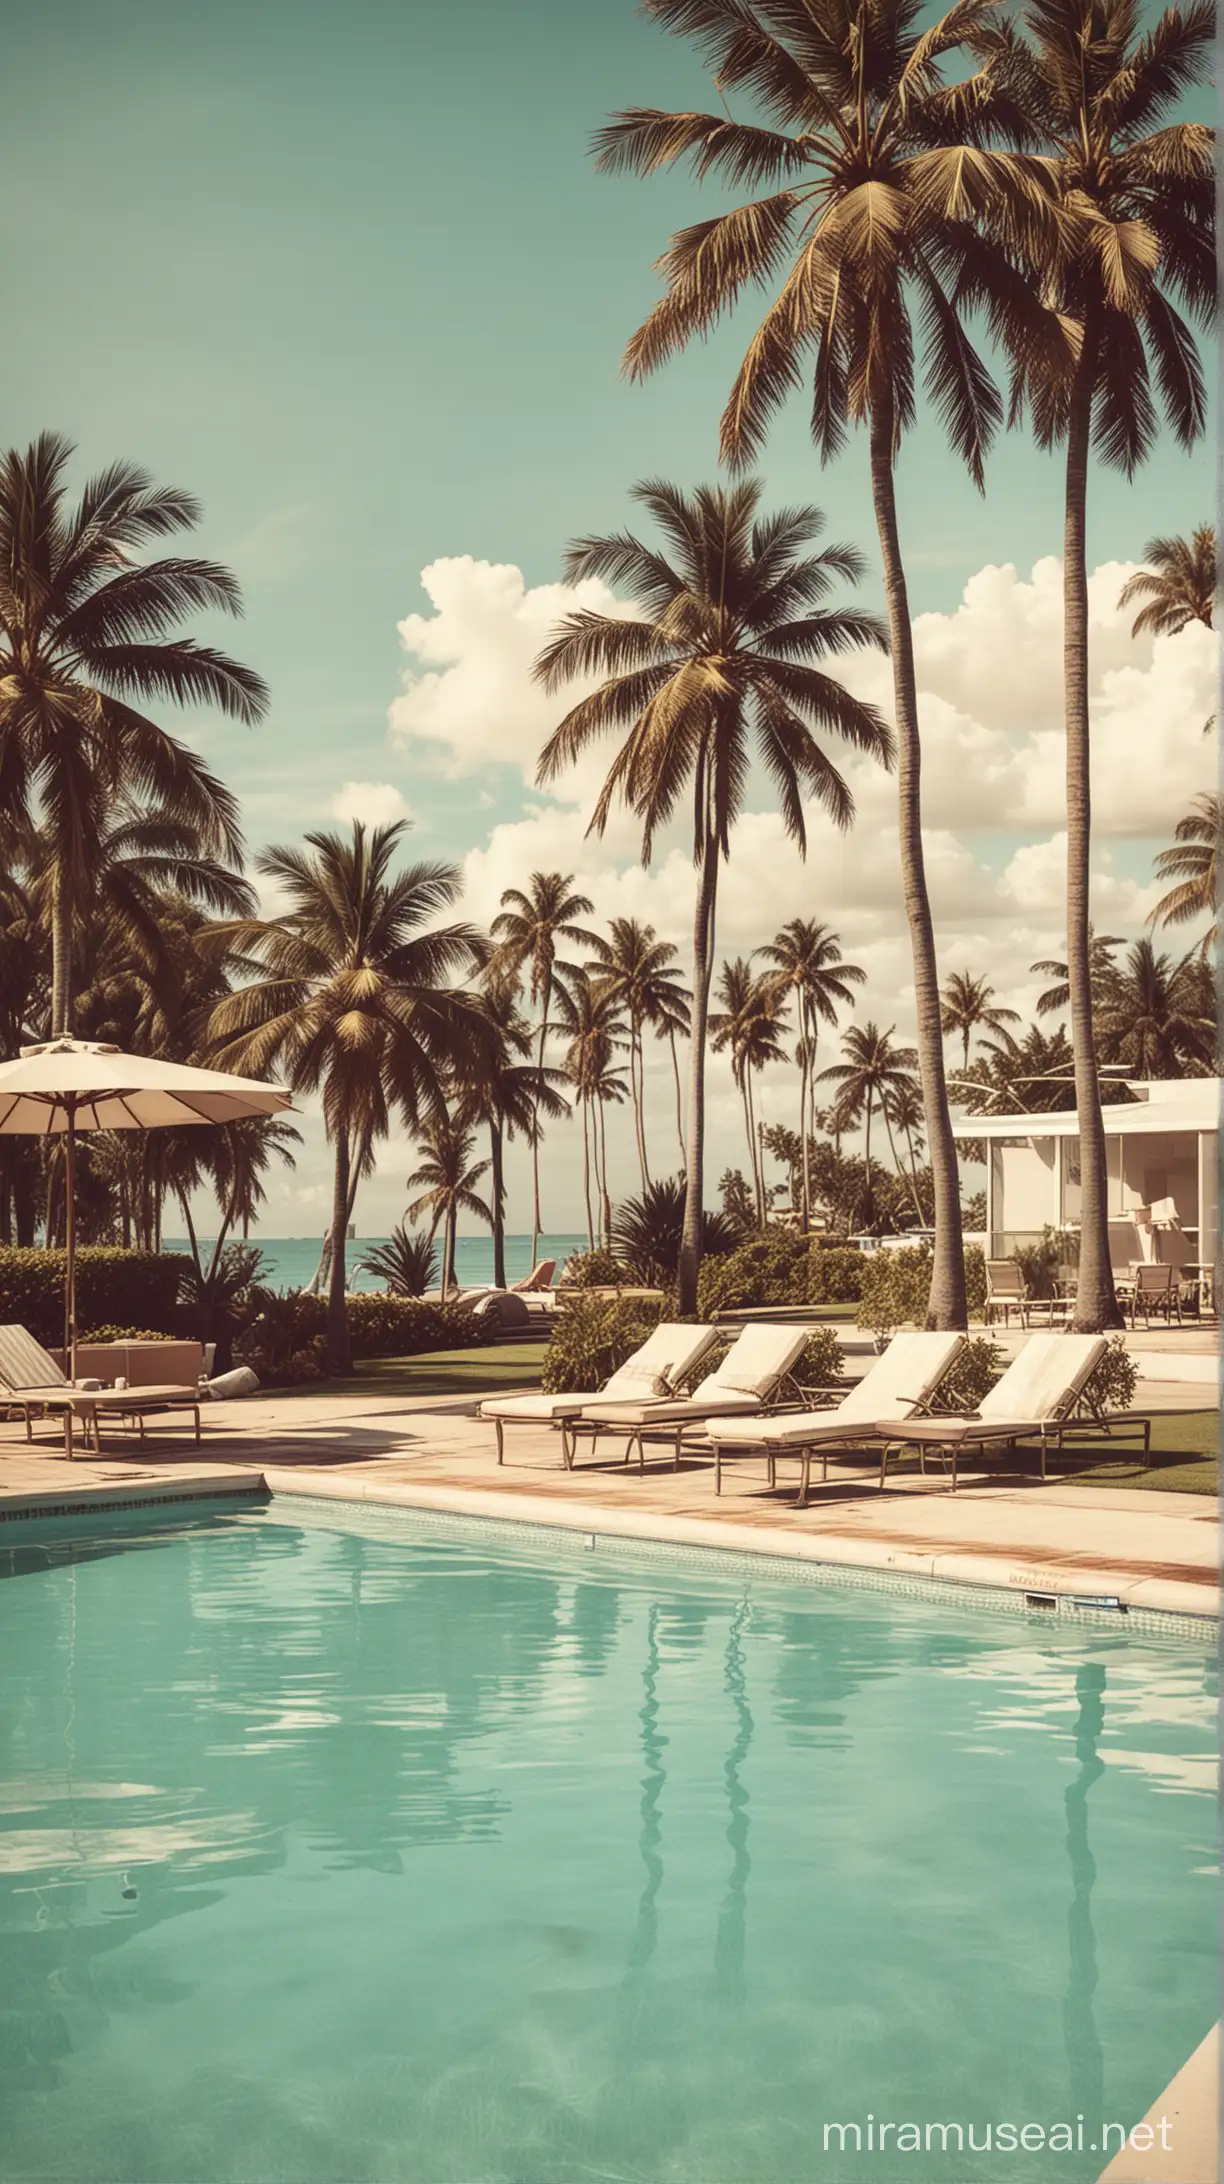 Create an image in retro style which looks like a photograph from the 80s, taken in Miami, with palm trees, swimming pool cocktails and a pool party setting. Maybe add a surfboard. And a faded ink iffect of retro photographs